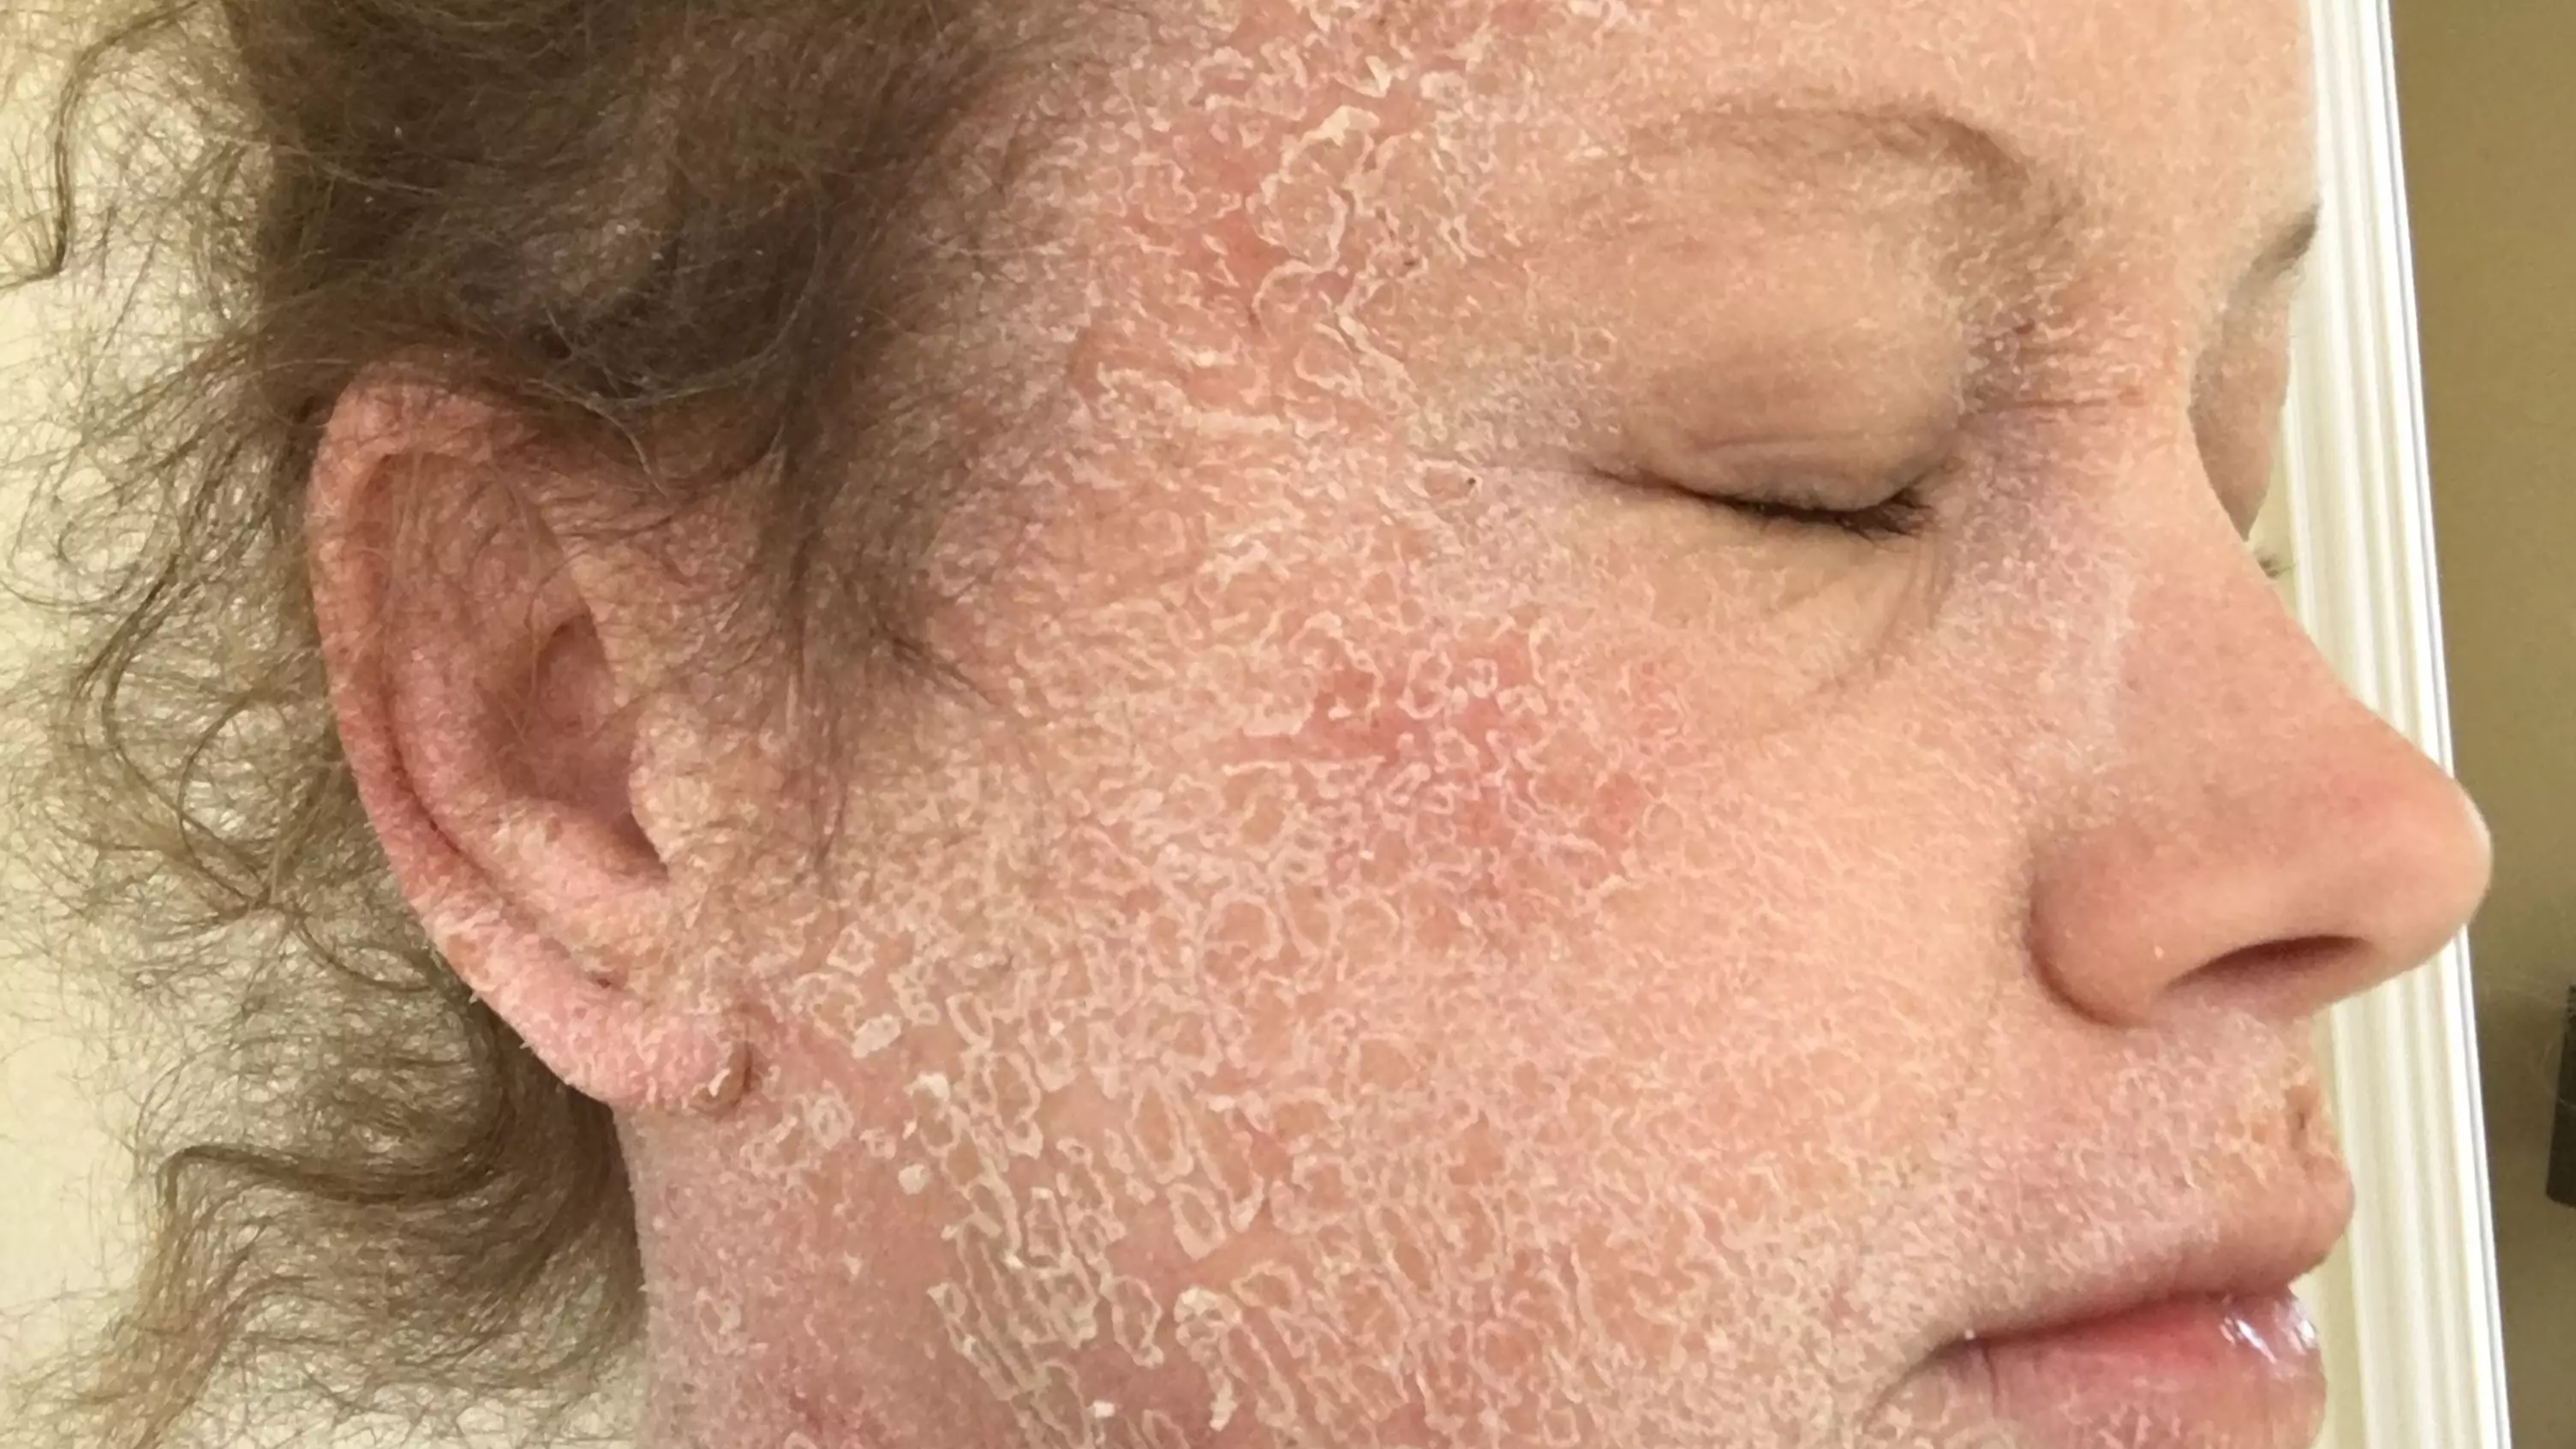 Woman Clears Up Her Severe Eczema By Drastically Changing Her Diet